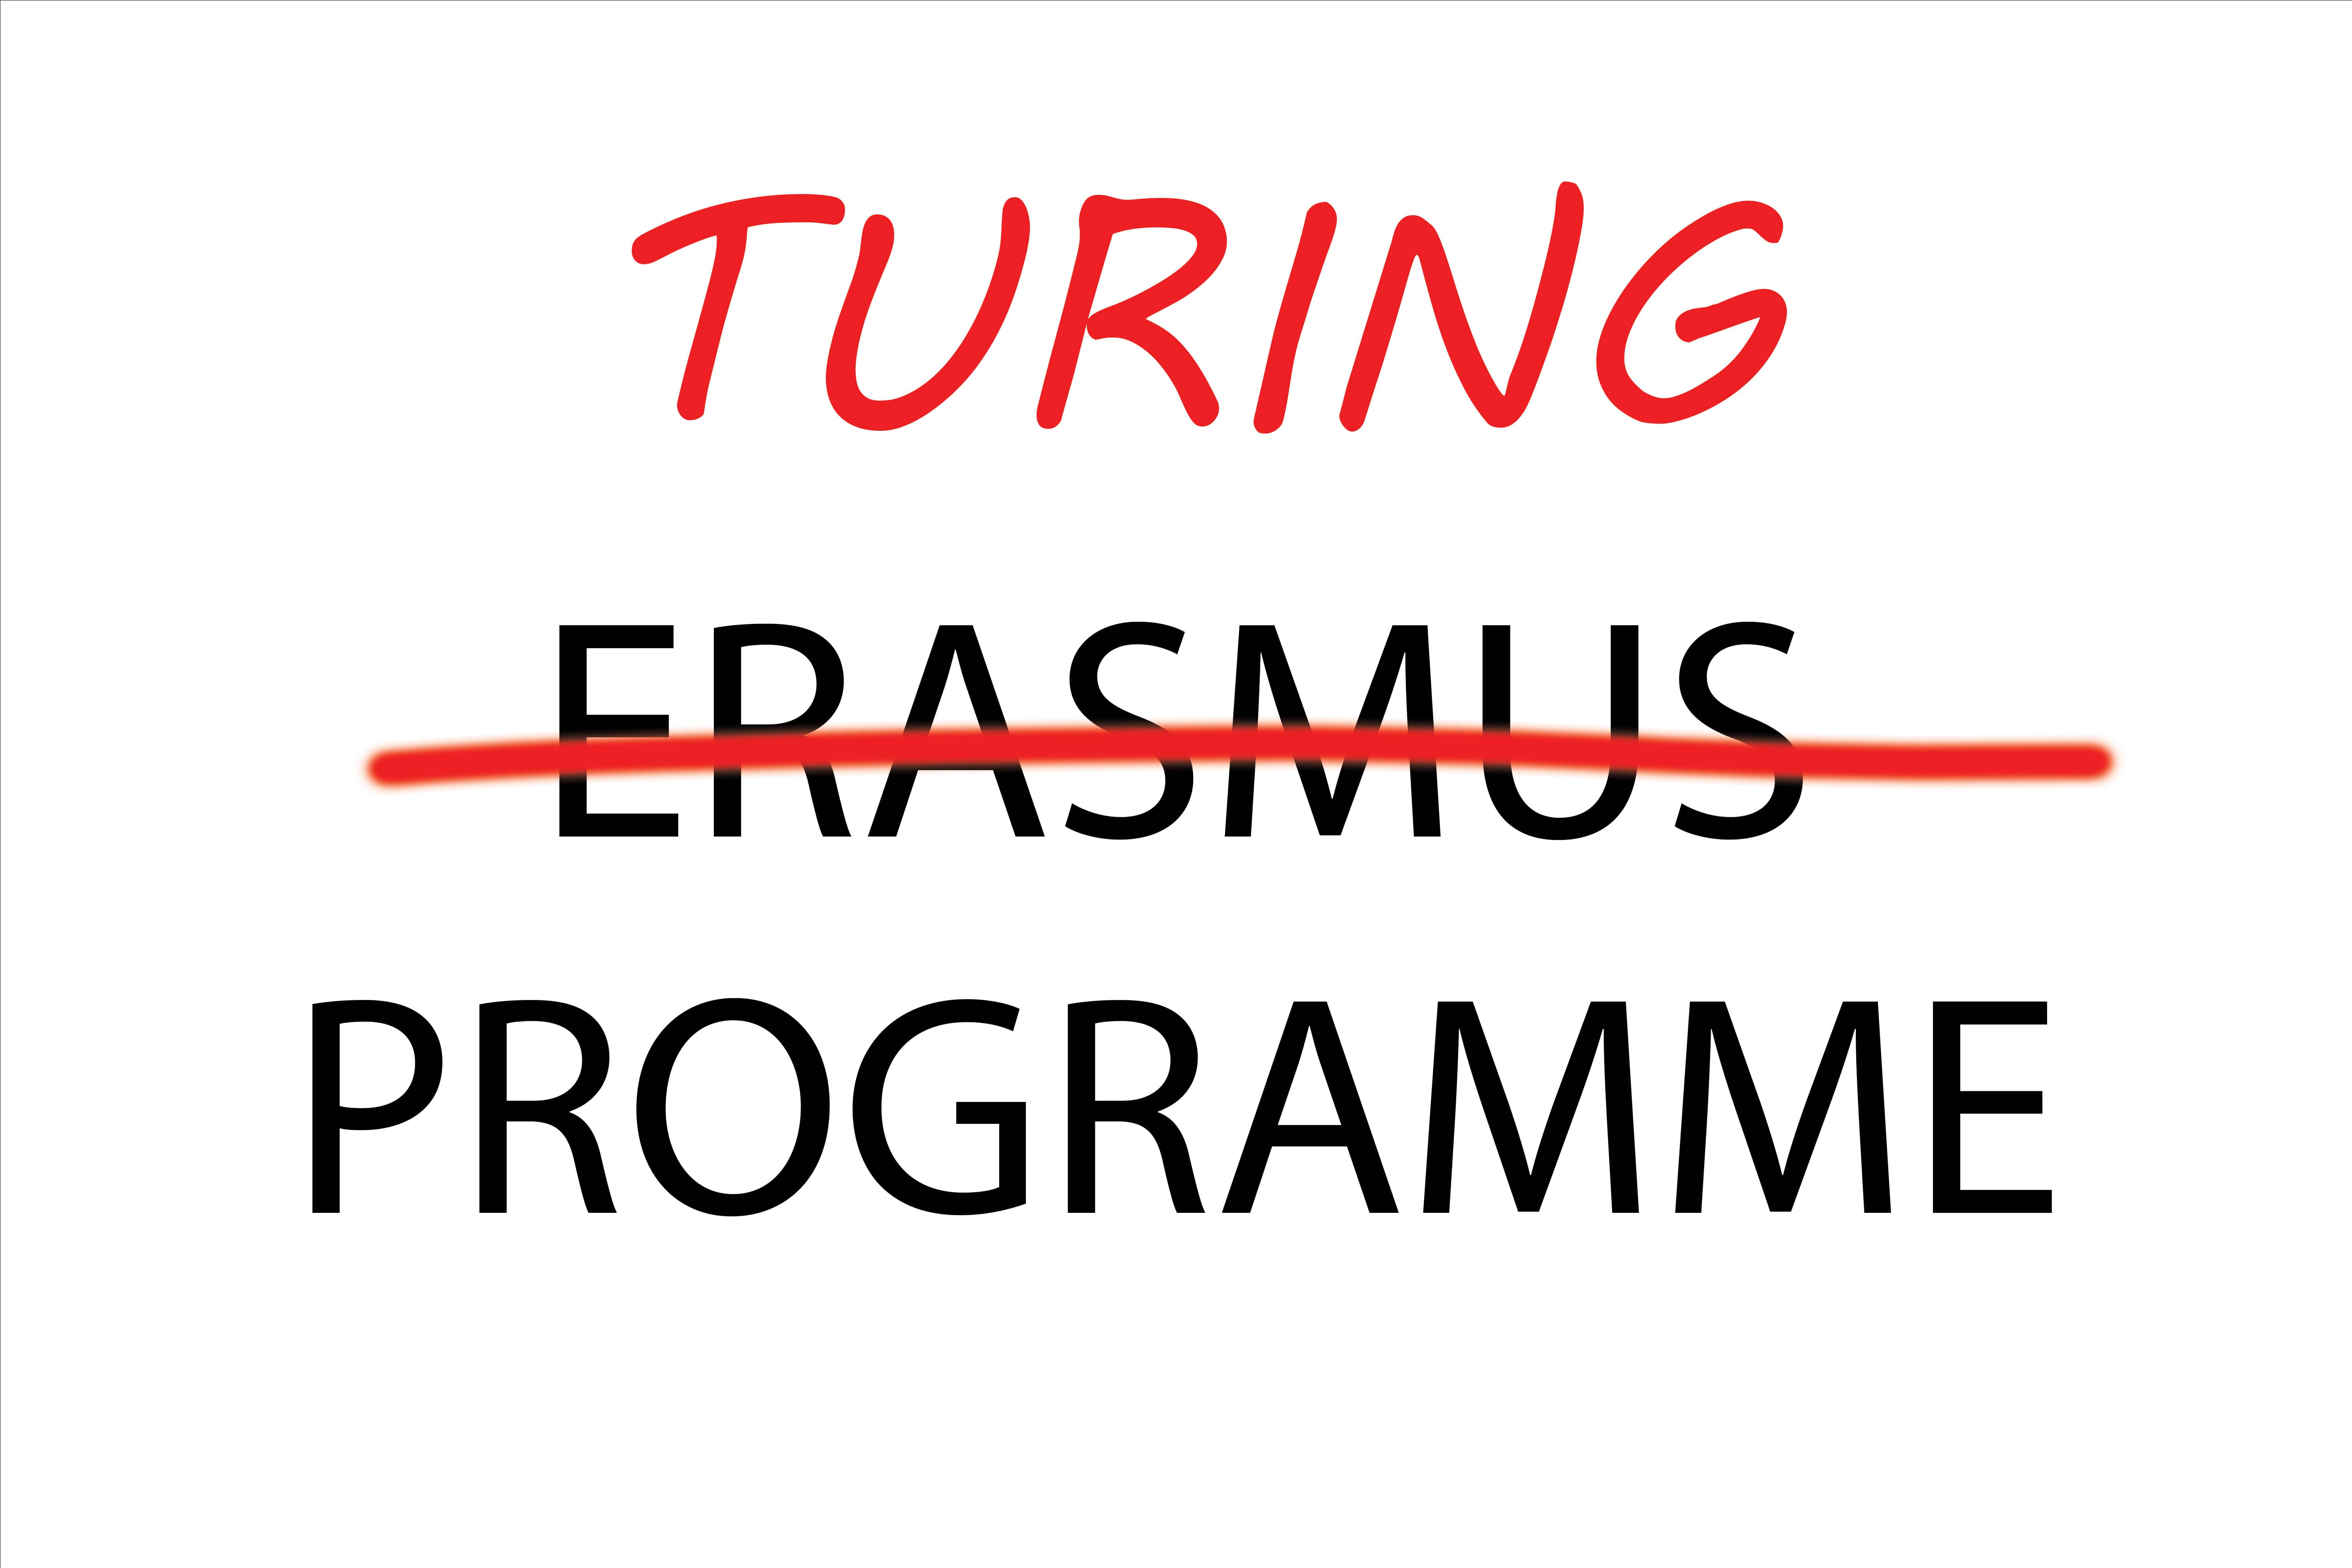 The Turing scheme replacing Erasmus+ “is not a like-for-like swap”